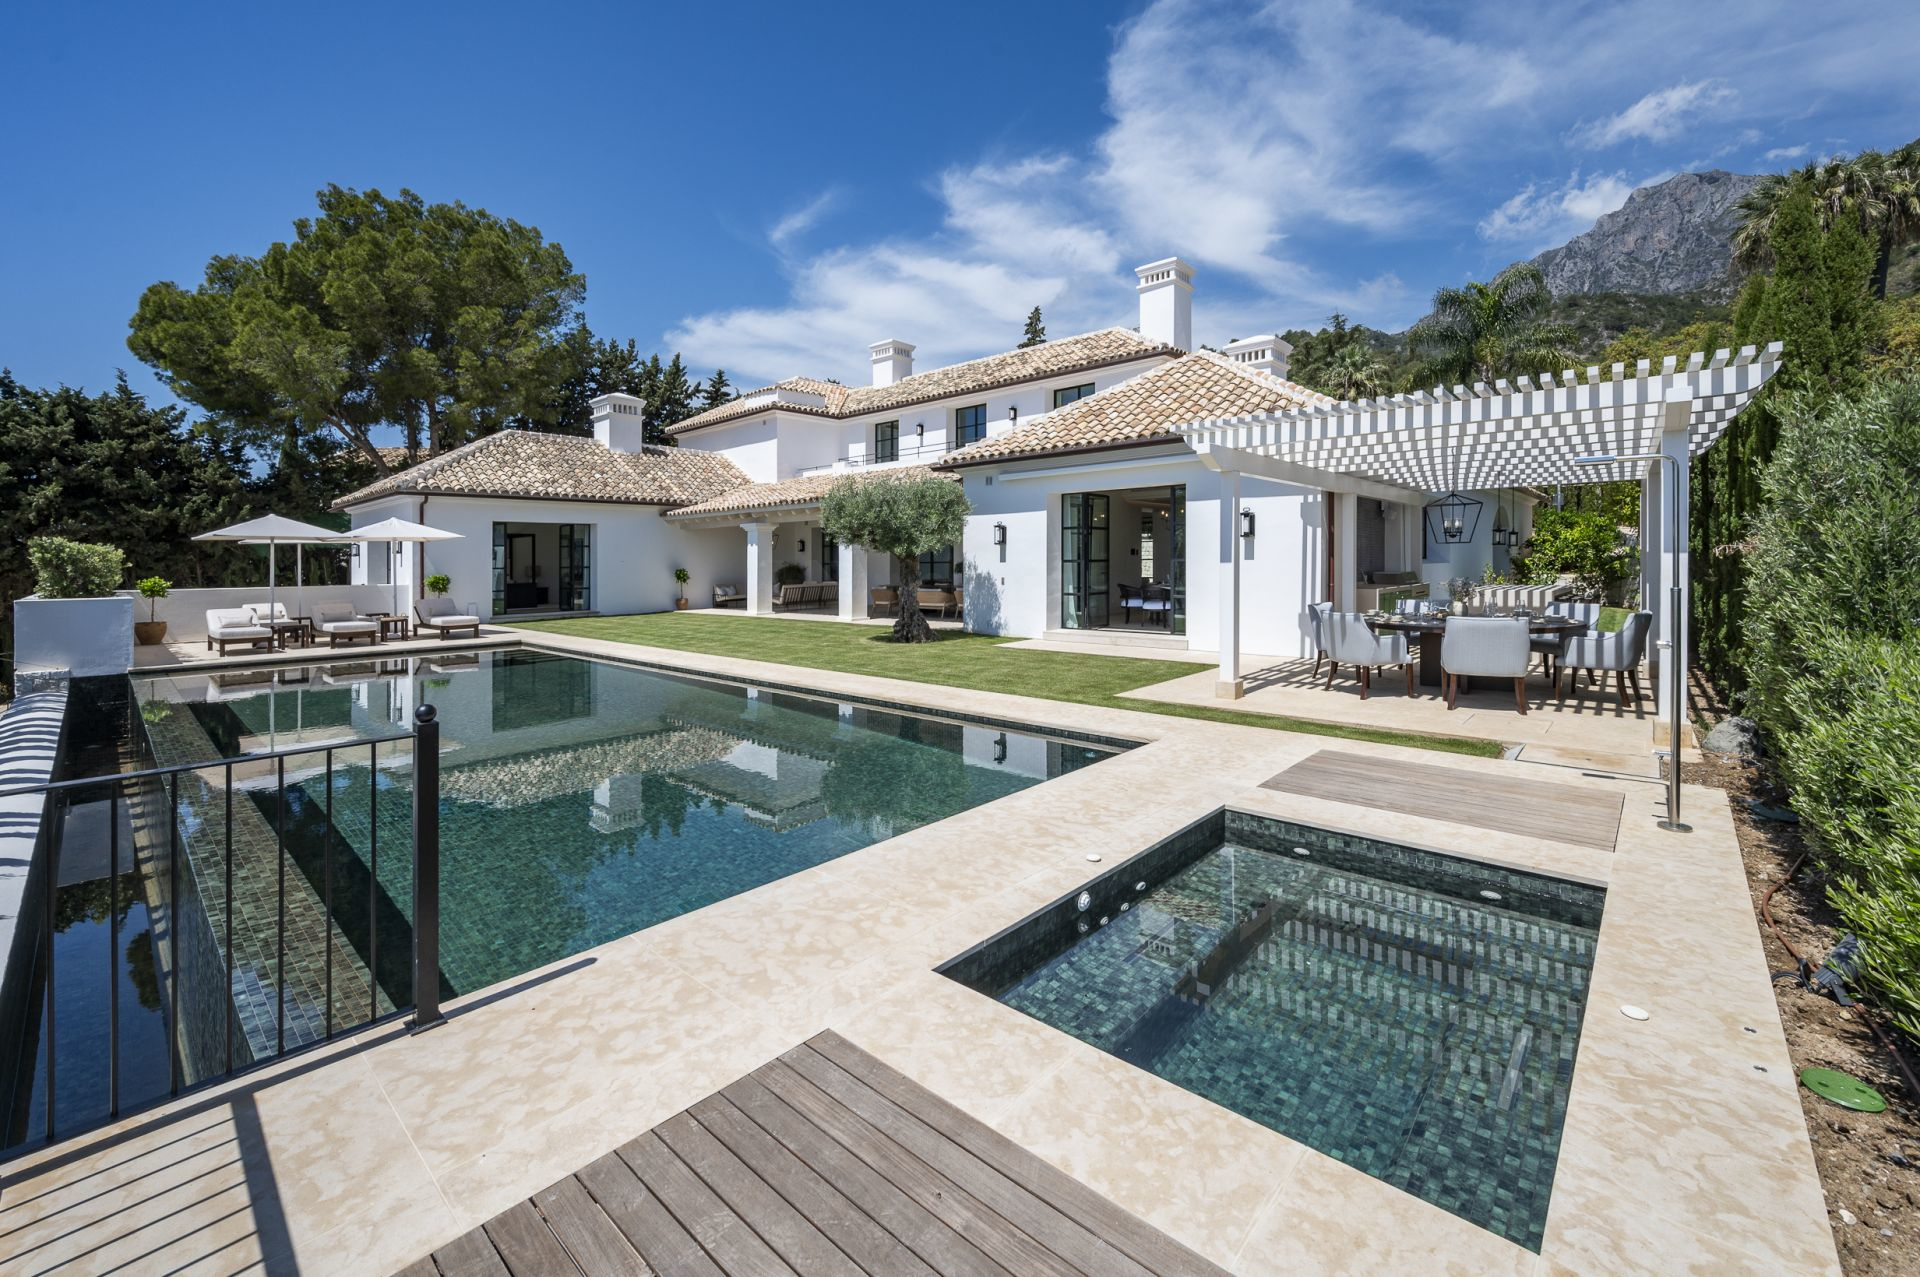 Exceptional villa ultra-luxury located in one of the most exclusive areas of Marbella